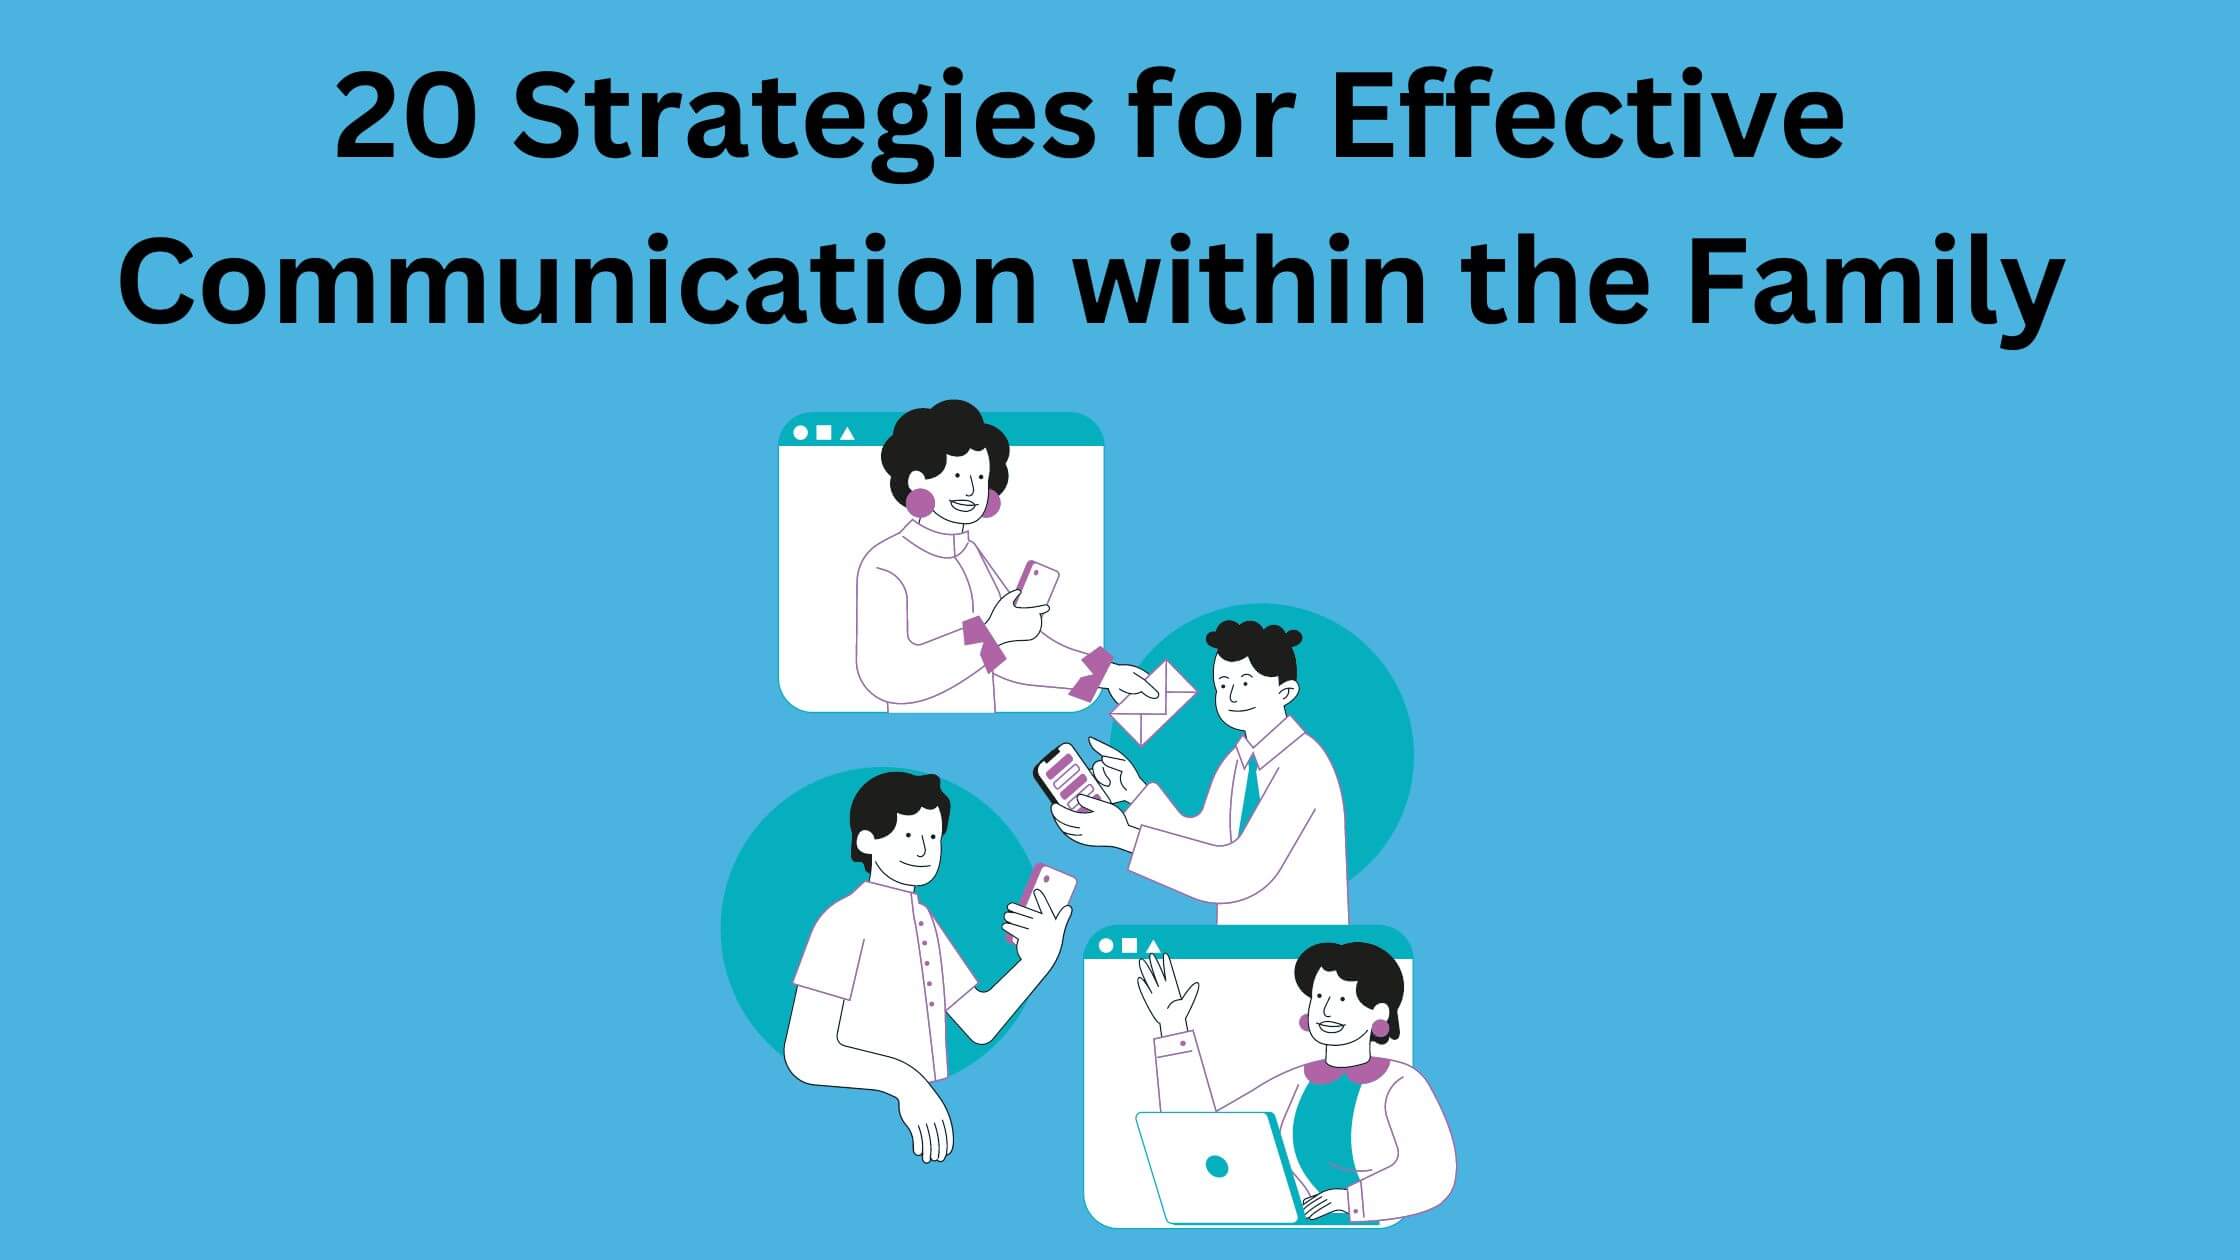 Tips for Effective Communication within the Family